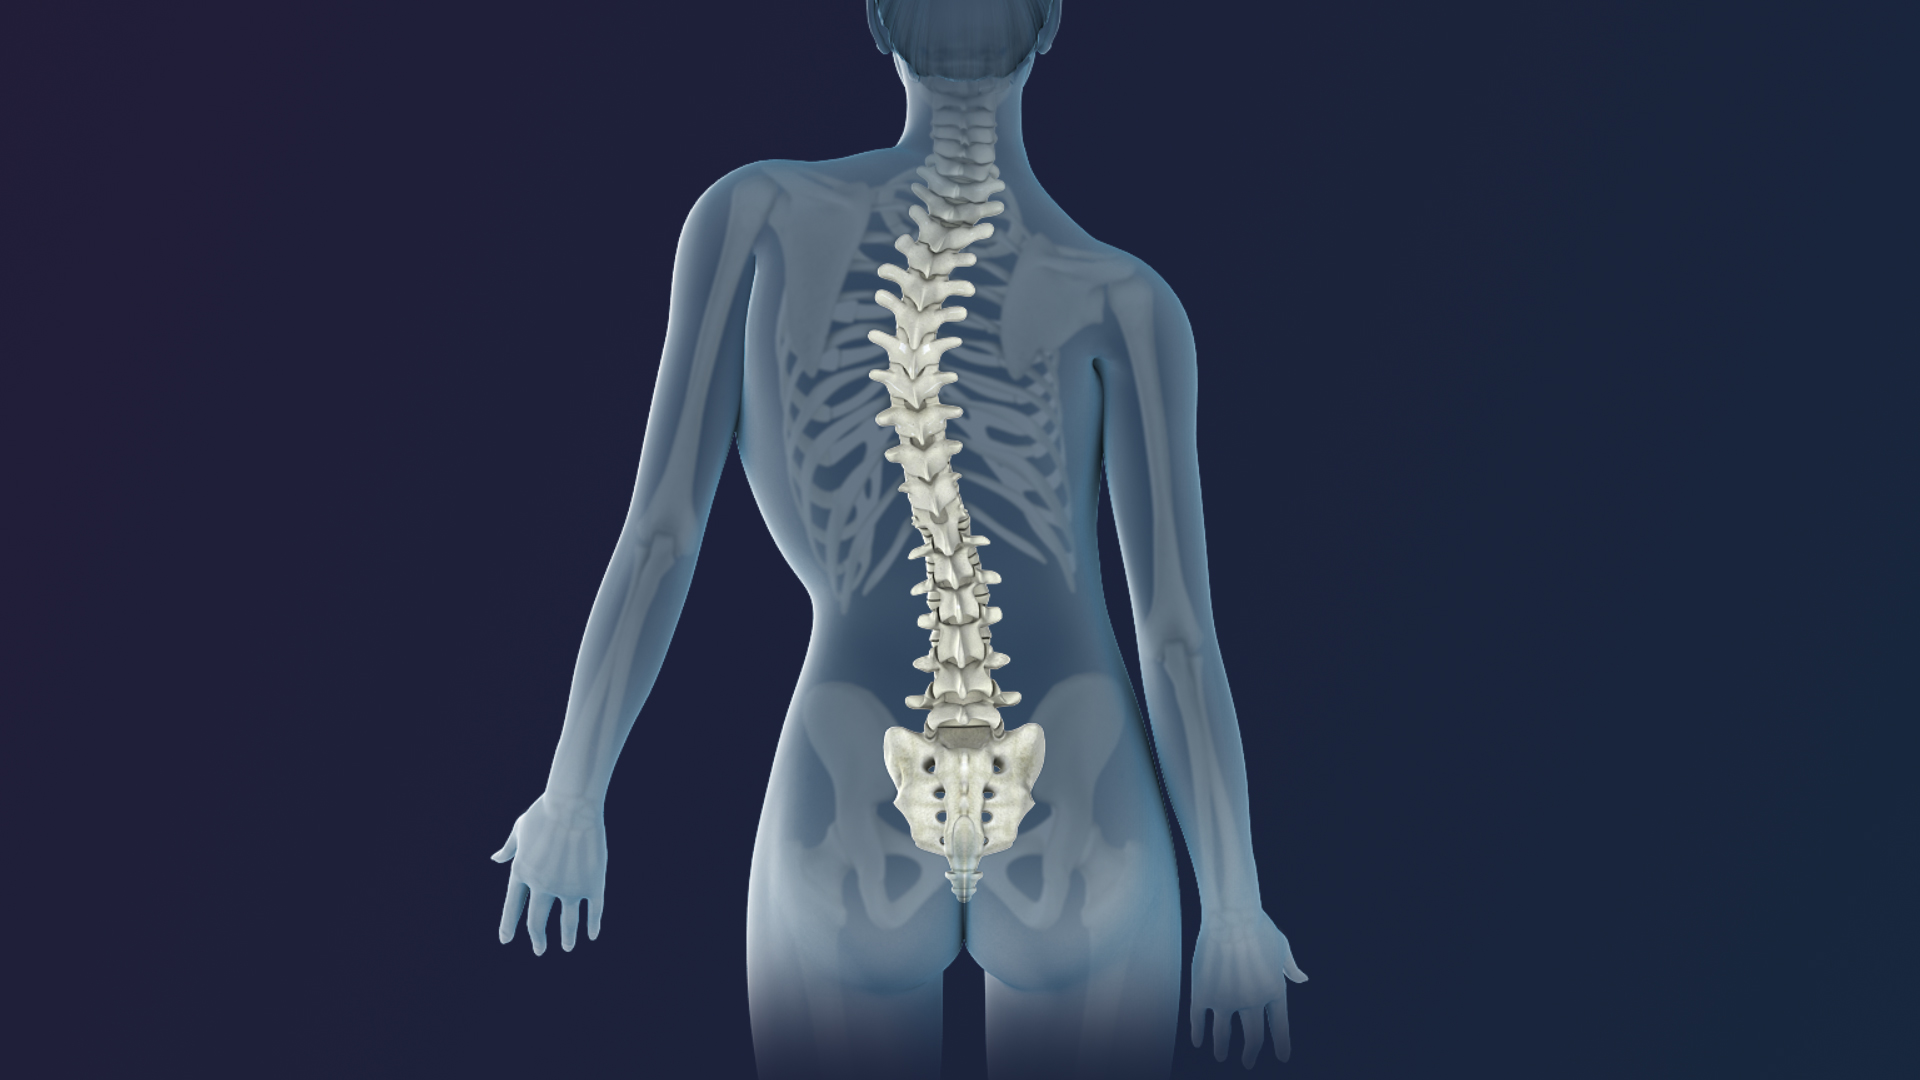 Scoliosis and Kyphosis